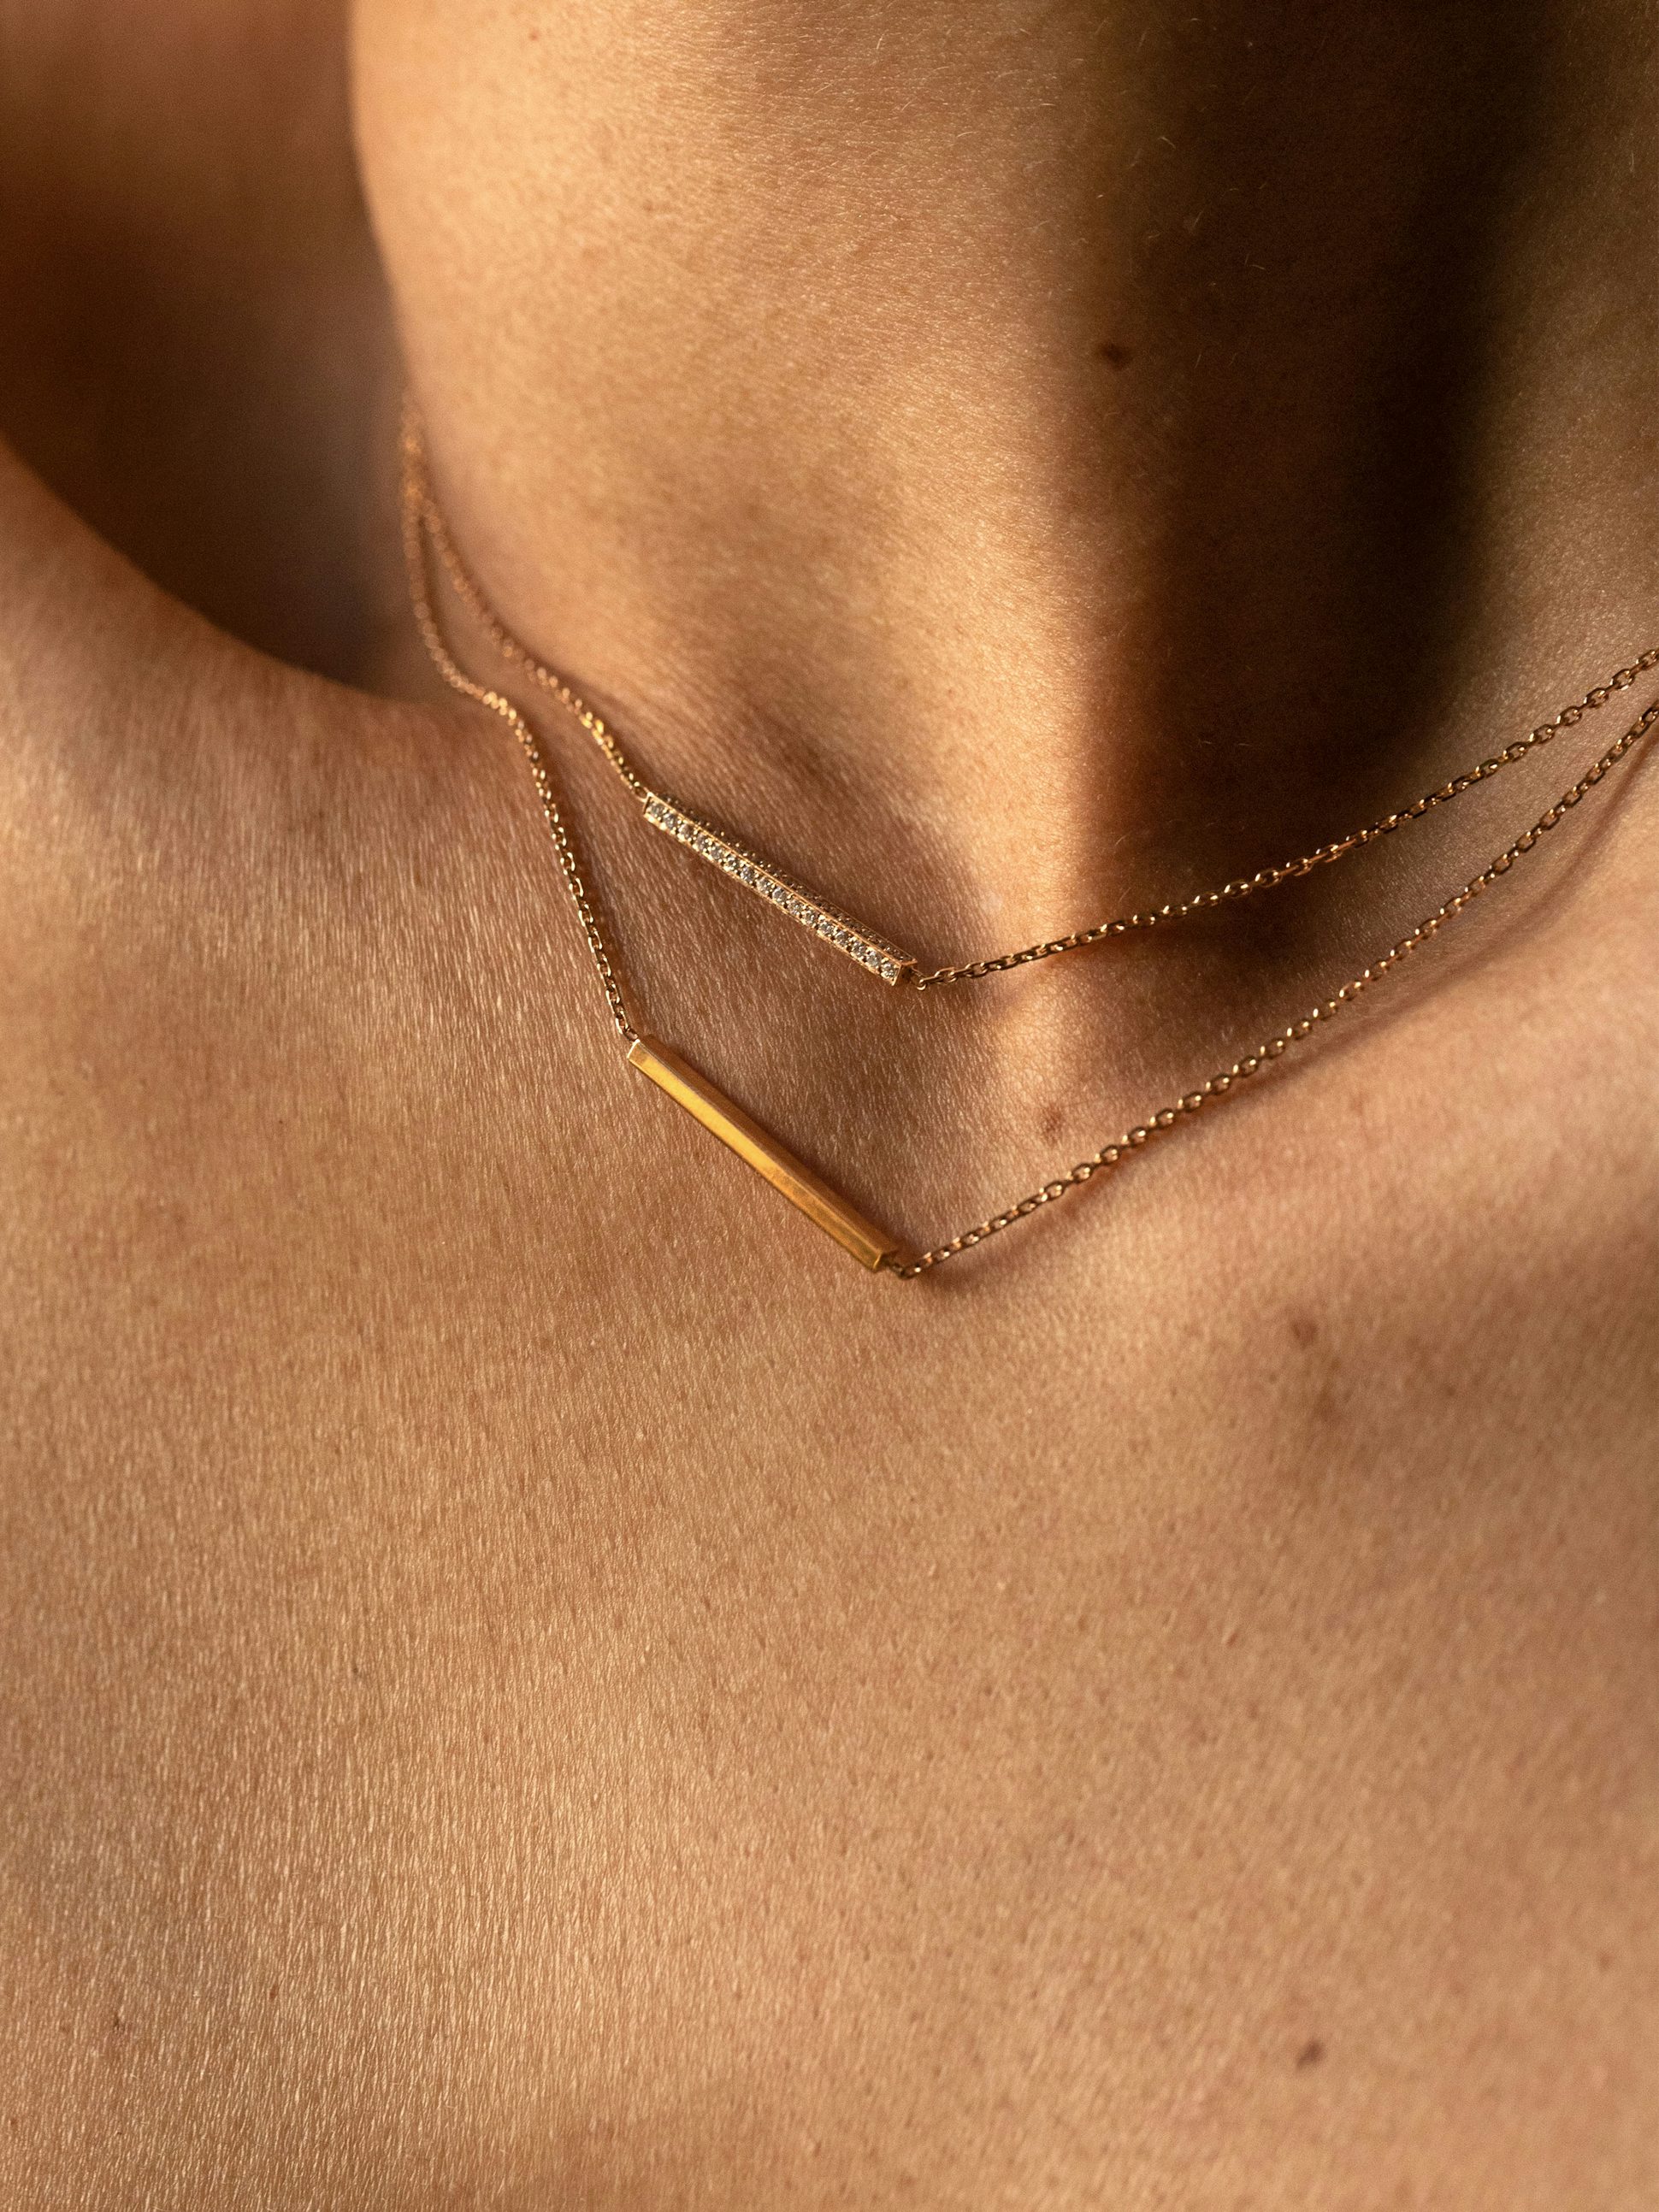 Anagramme polished motif in yellow gold 18k Fairmined ethical, on 42 cm chain